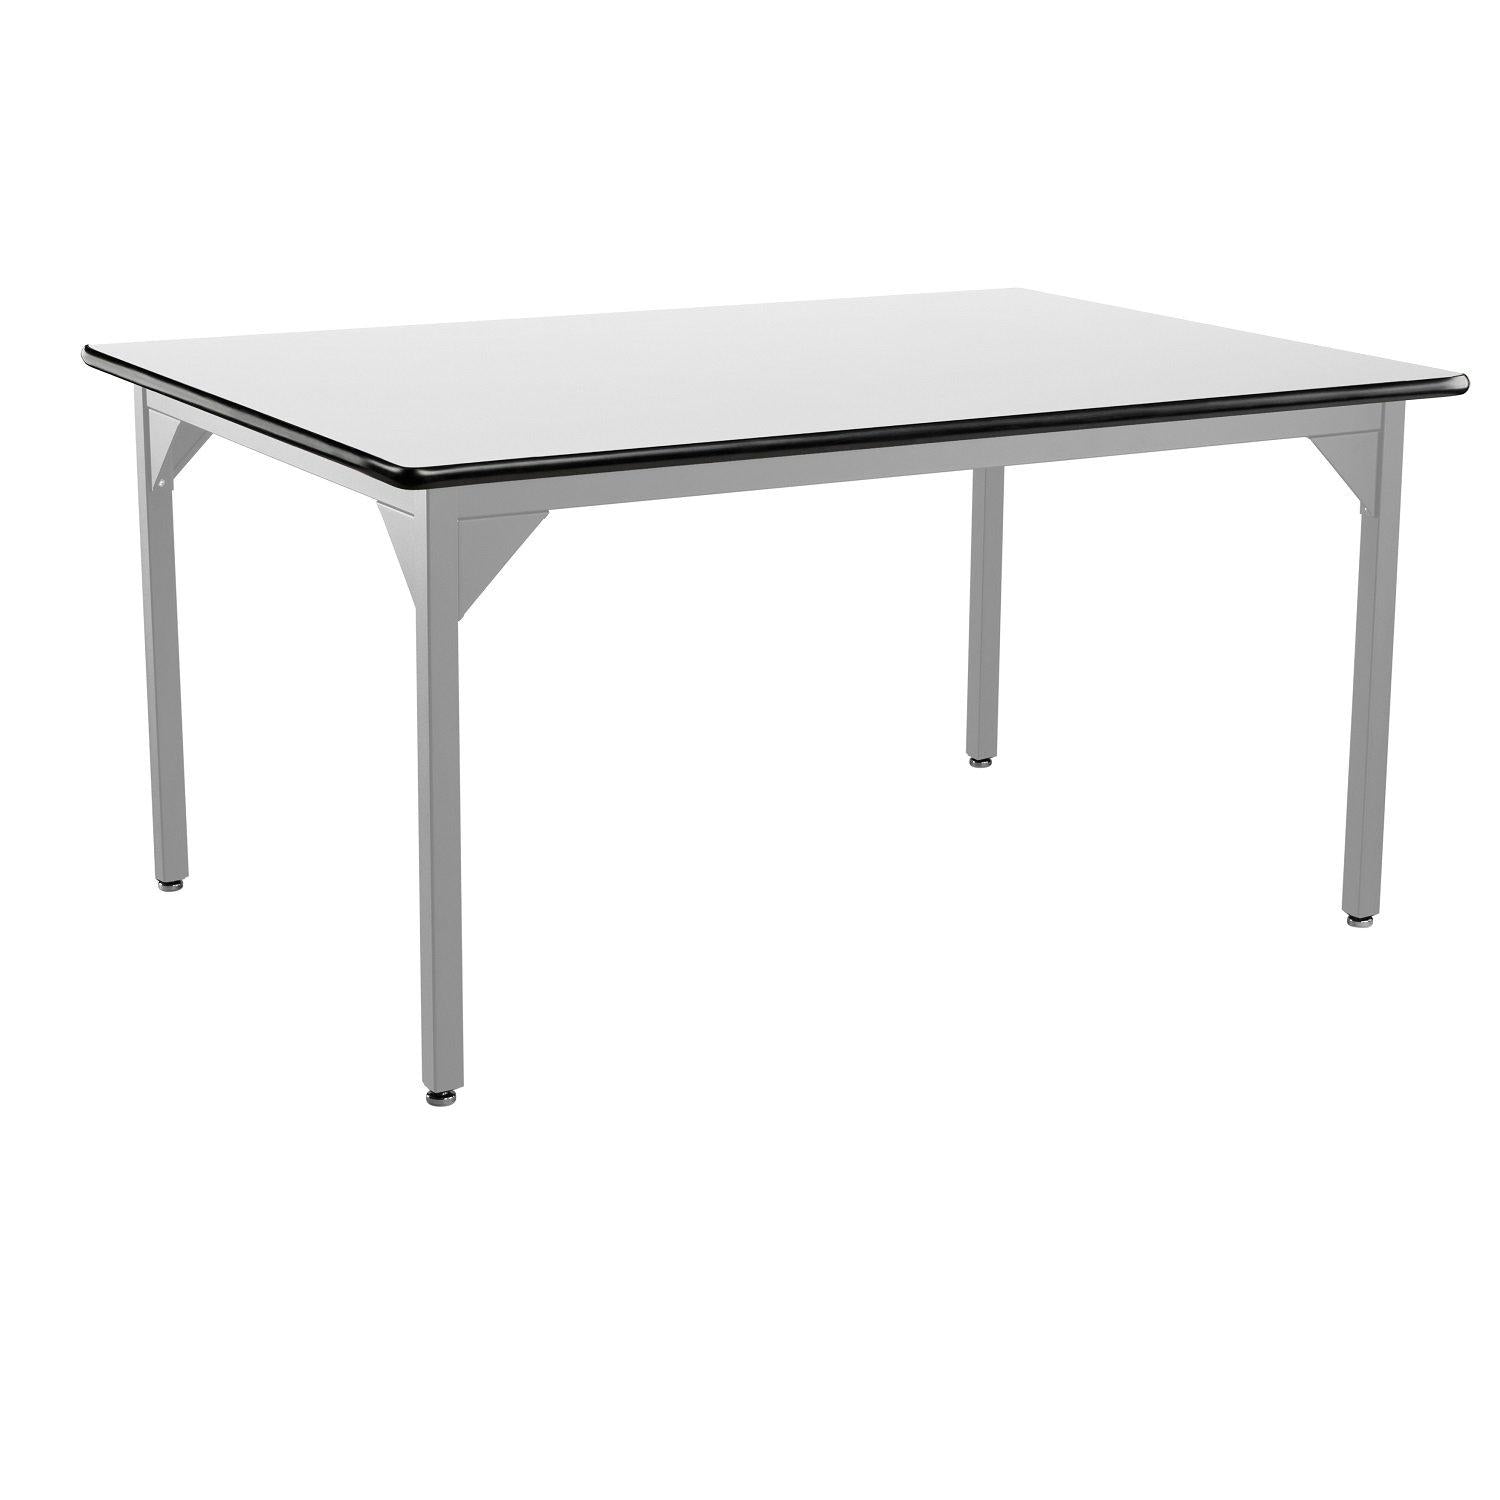 Heavy-Duty Fixed Height Utility Table, Soft Grey Frame, 48" x 60", Whiteboard High-Pressure Laminate Top